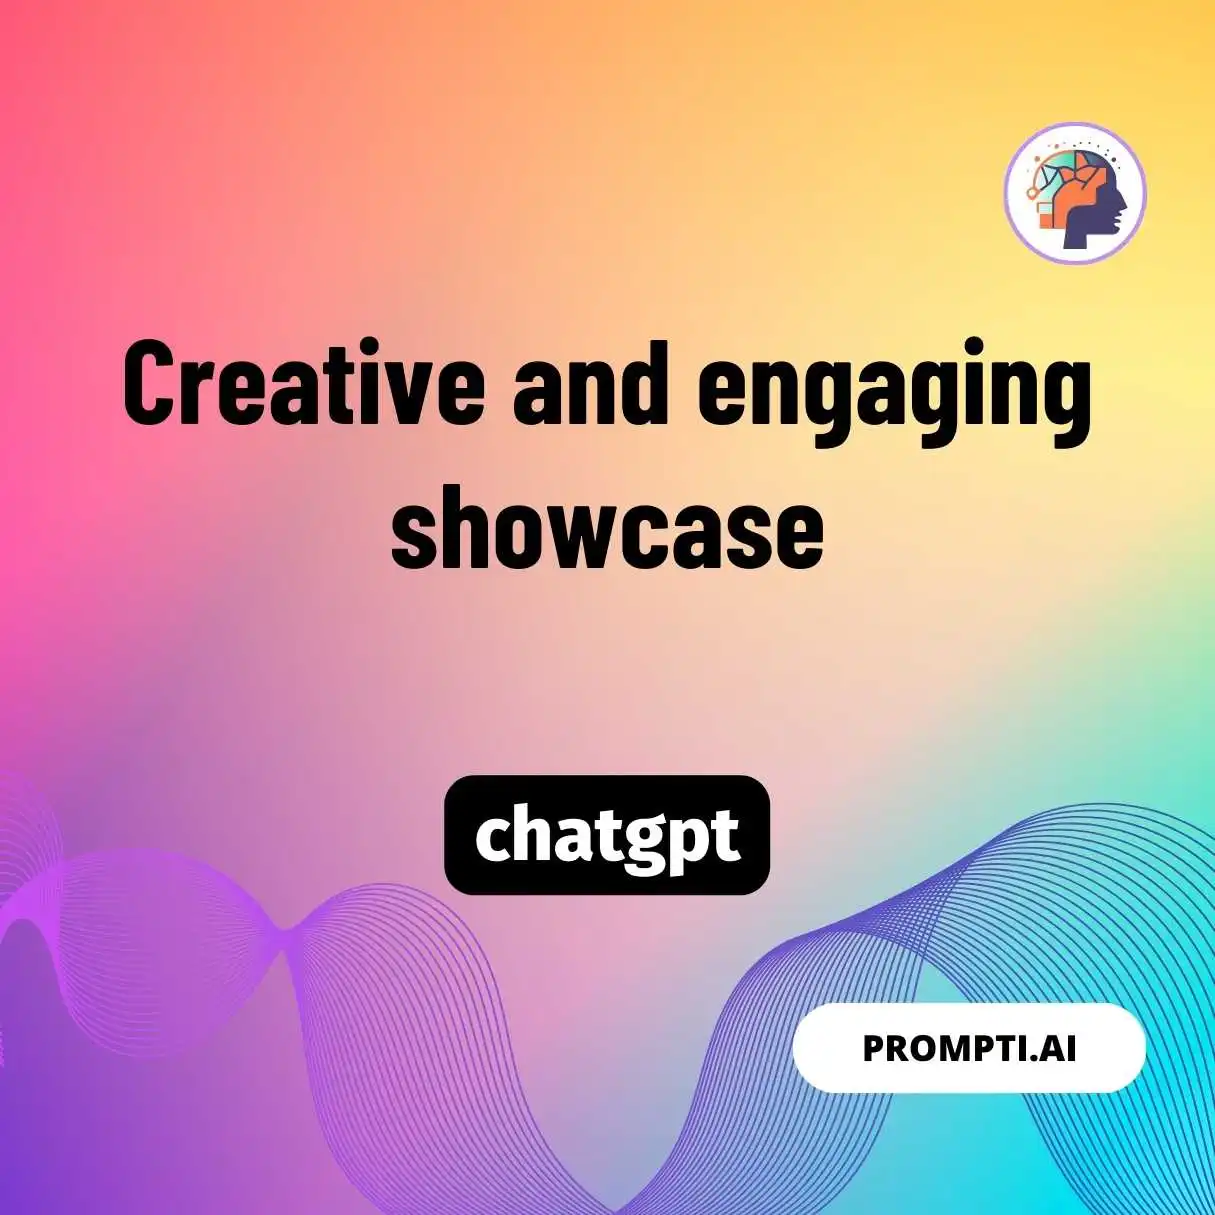 Creative and engaging showcase